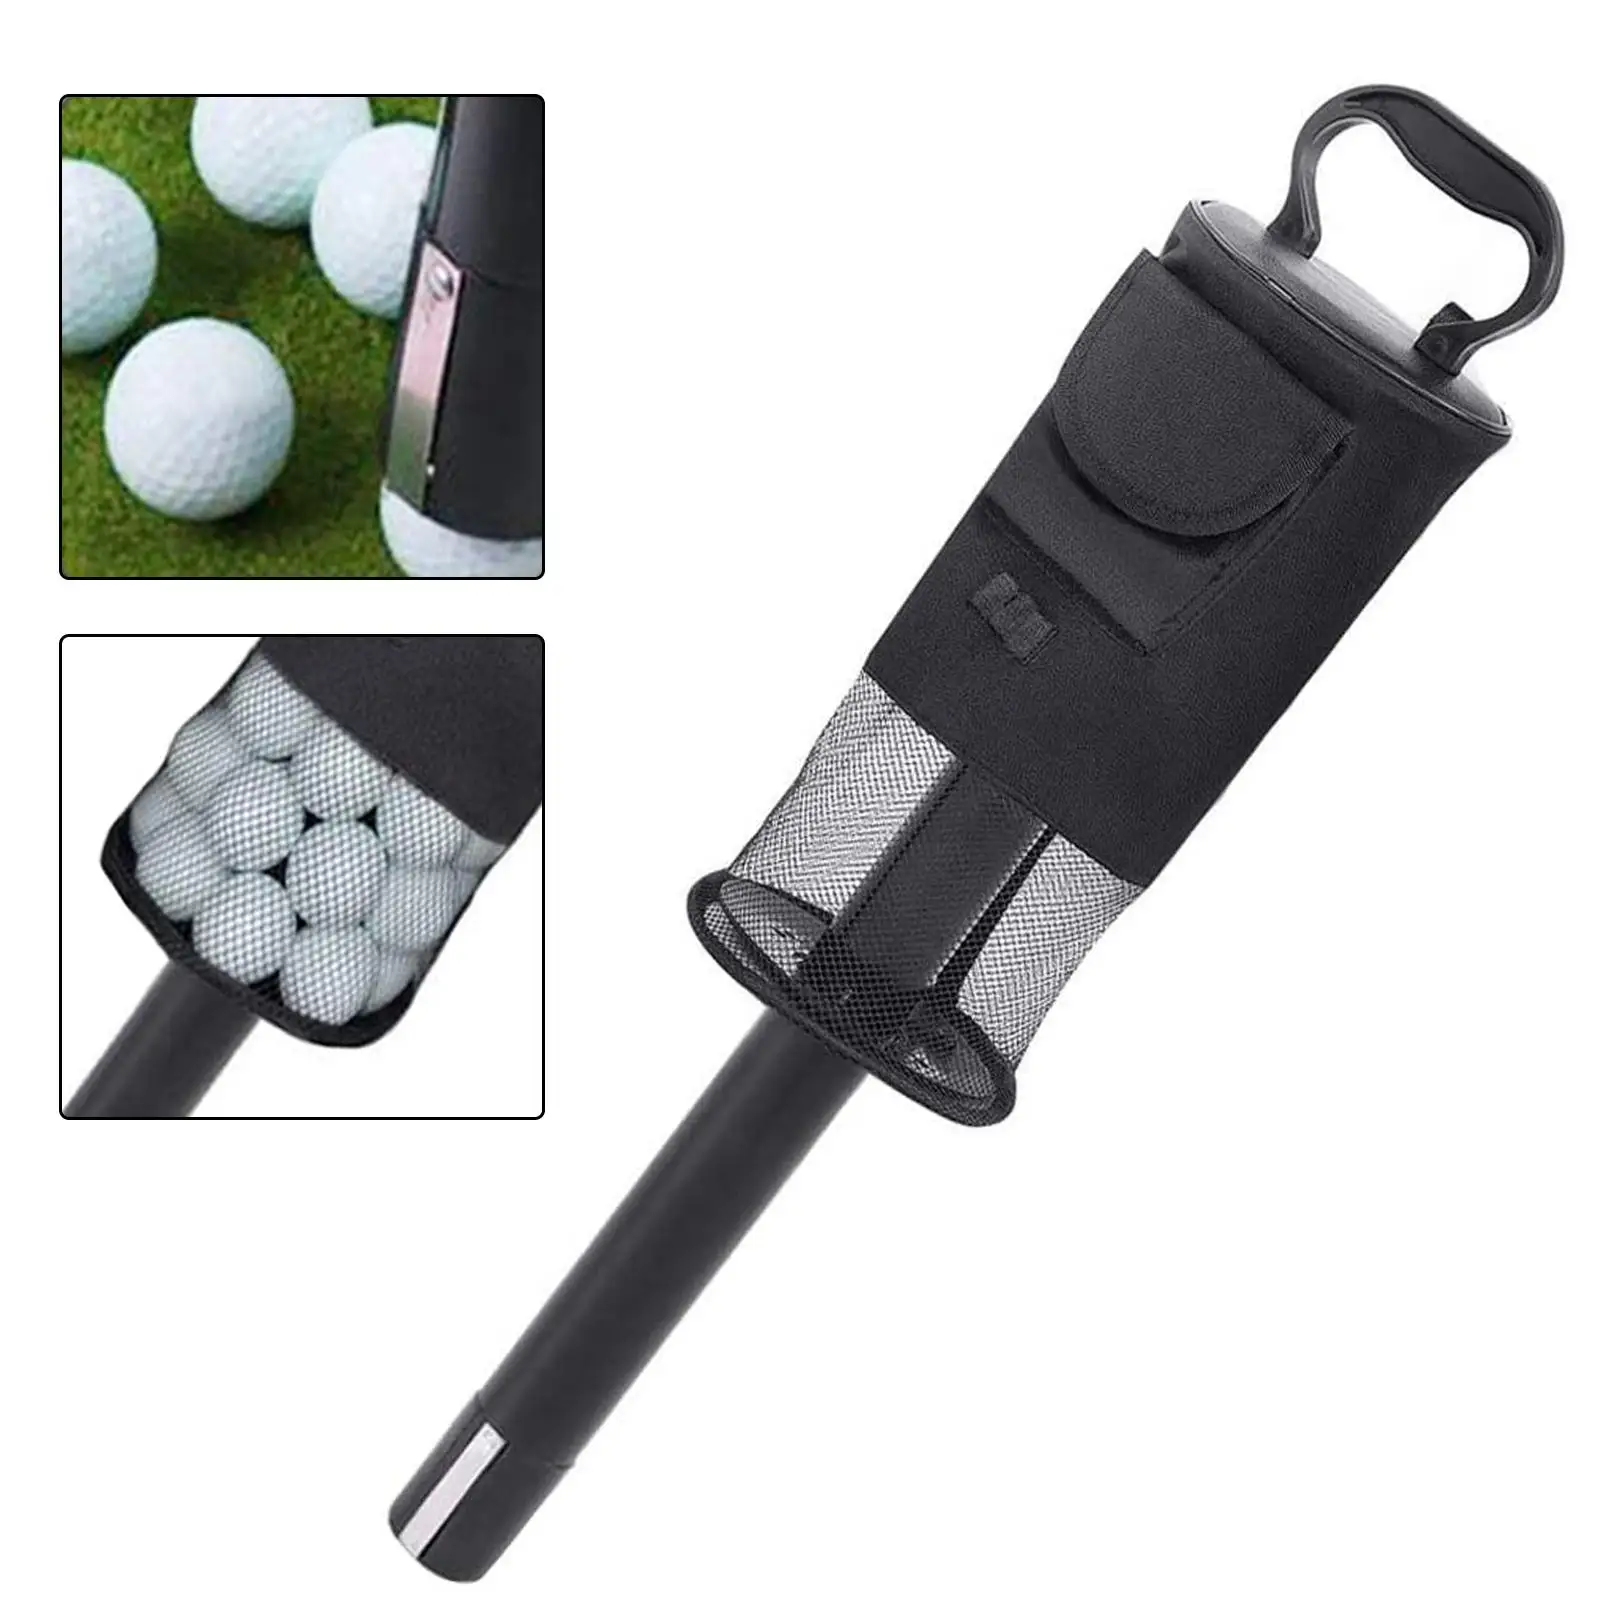 

Golf Ball Retriever Bag Golfing Equipment Hold up to 70 Balls Ball Picker Golf Shag Bags with Pocket and Tee Holder